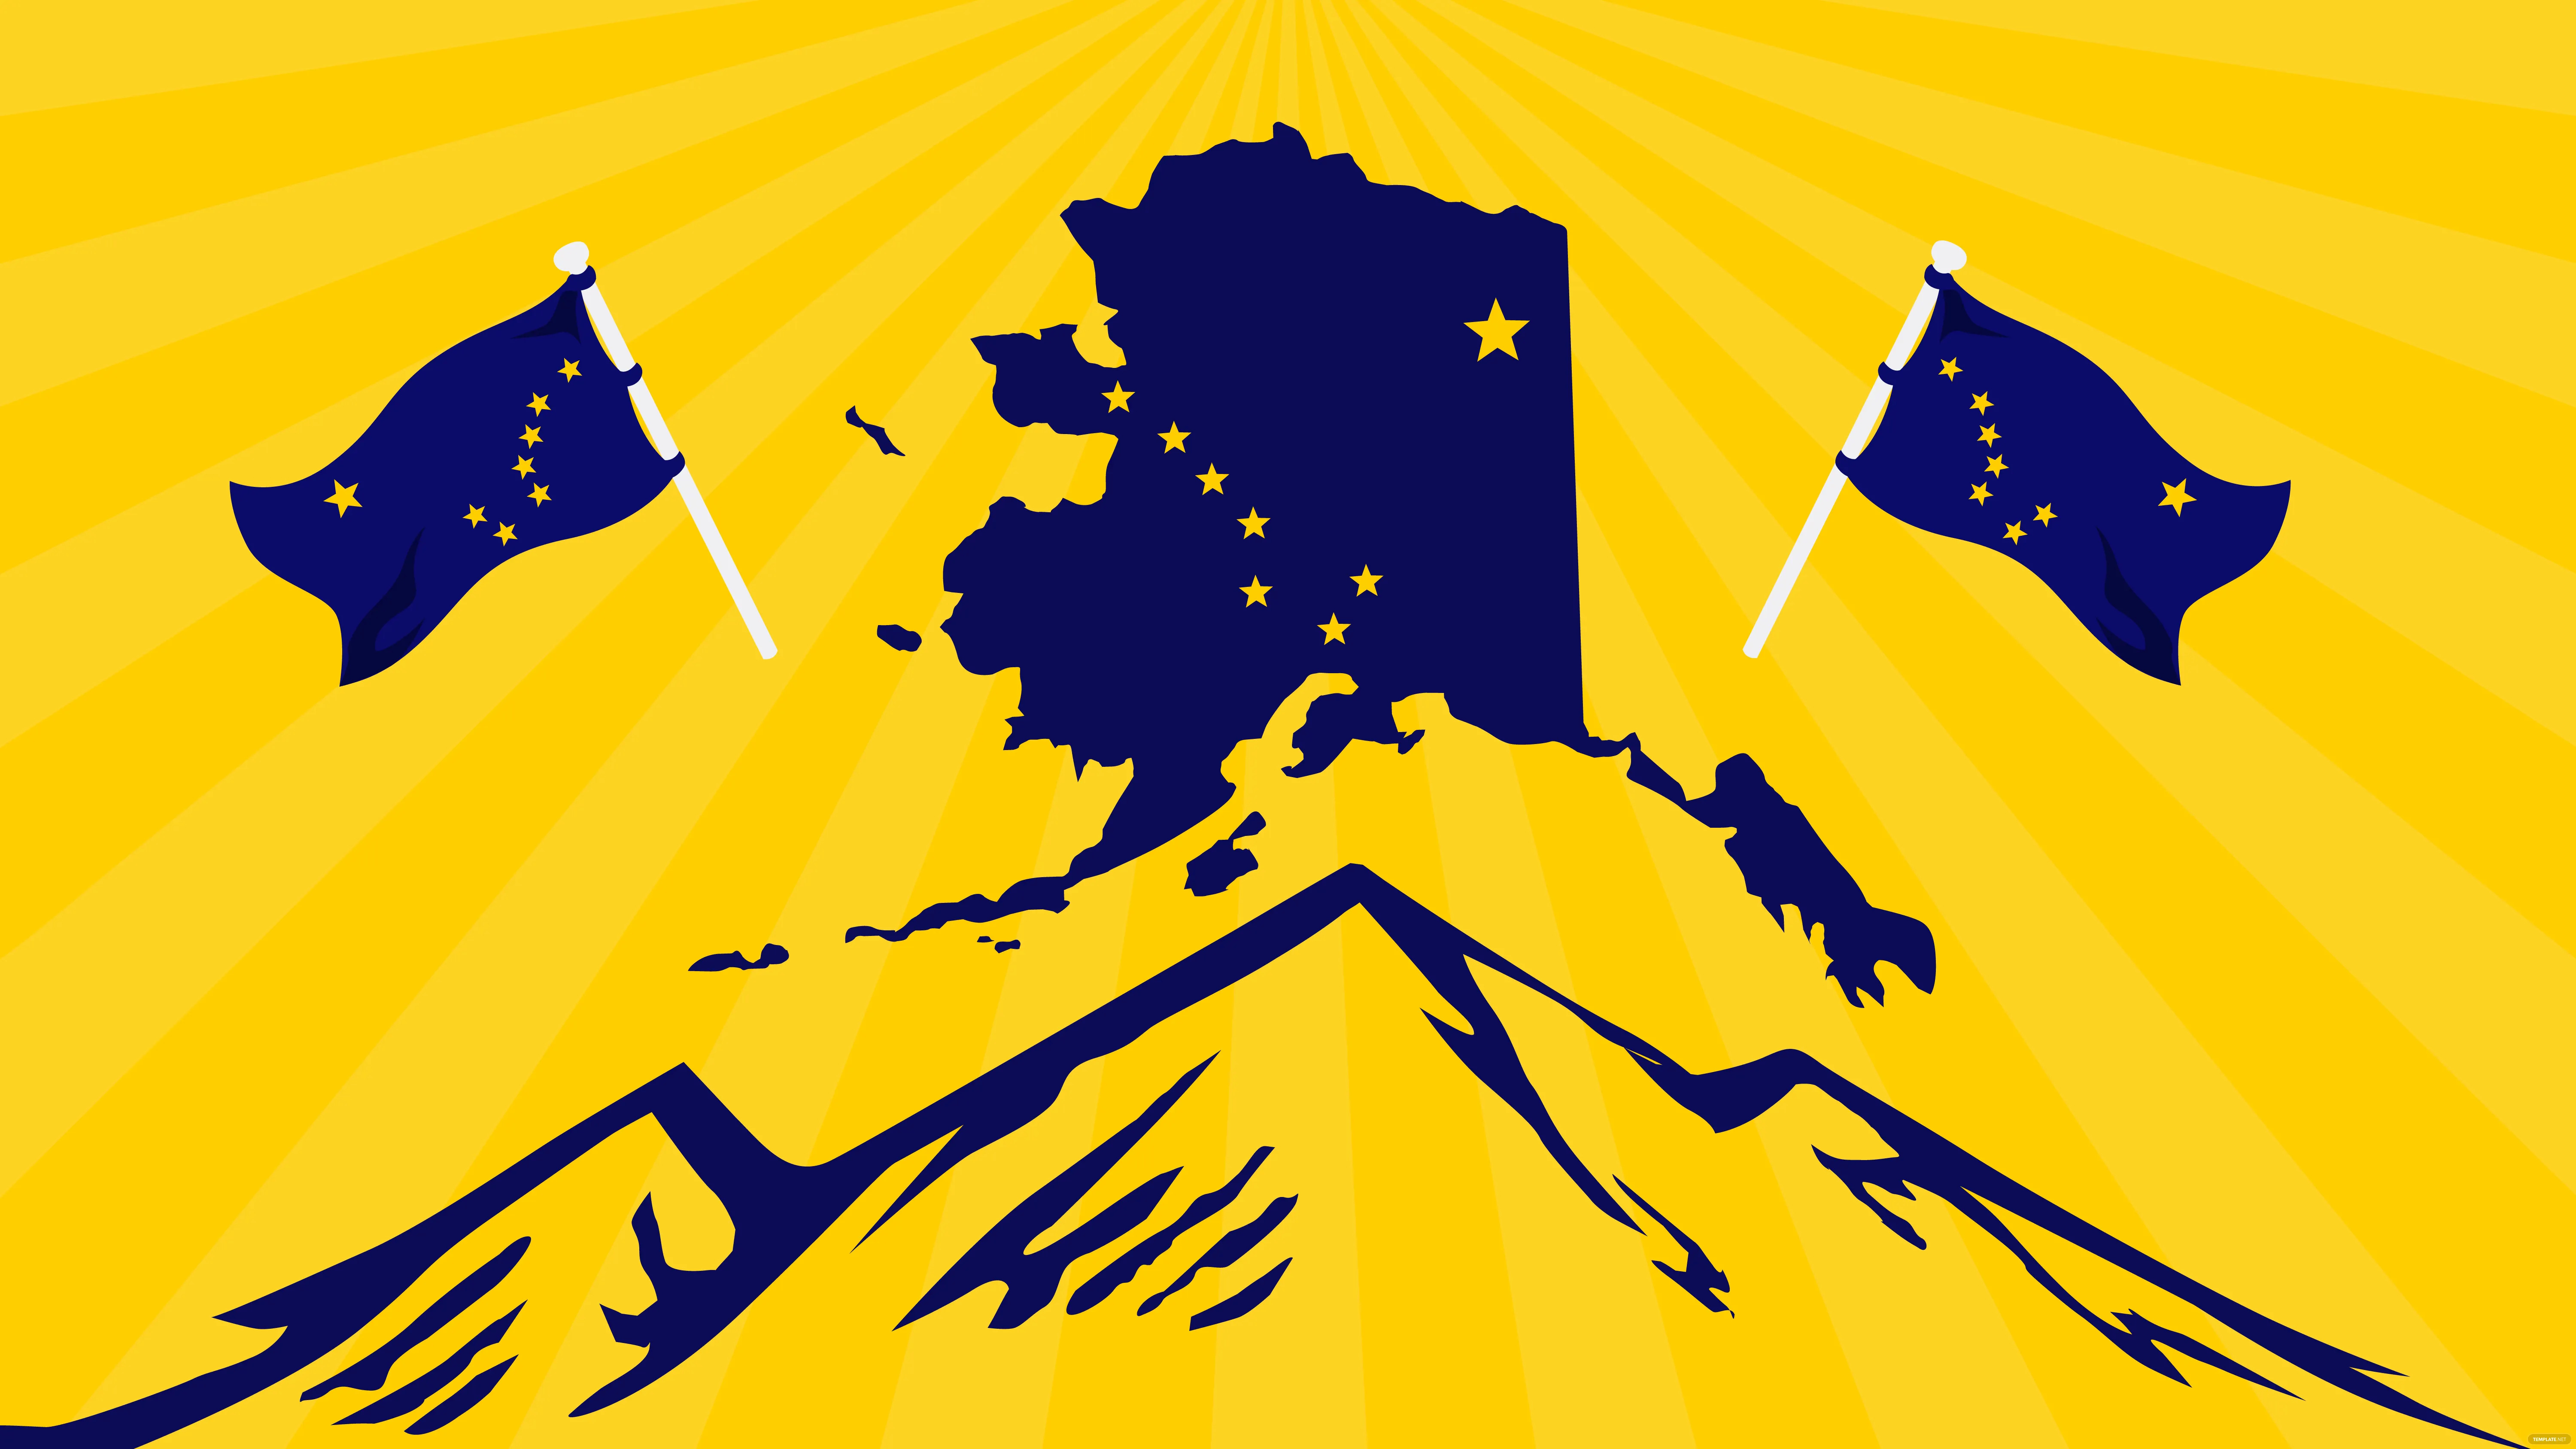 alaska day design background ideas and examples